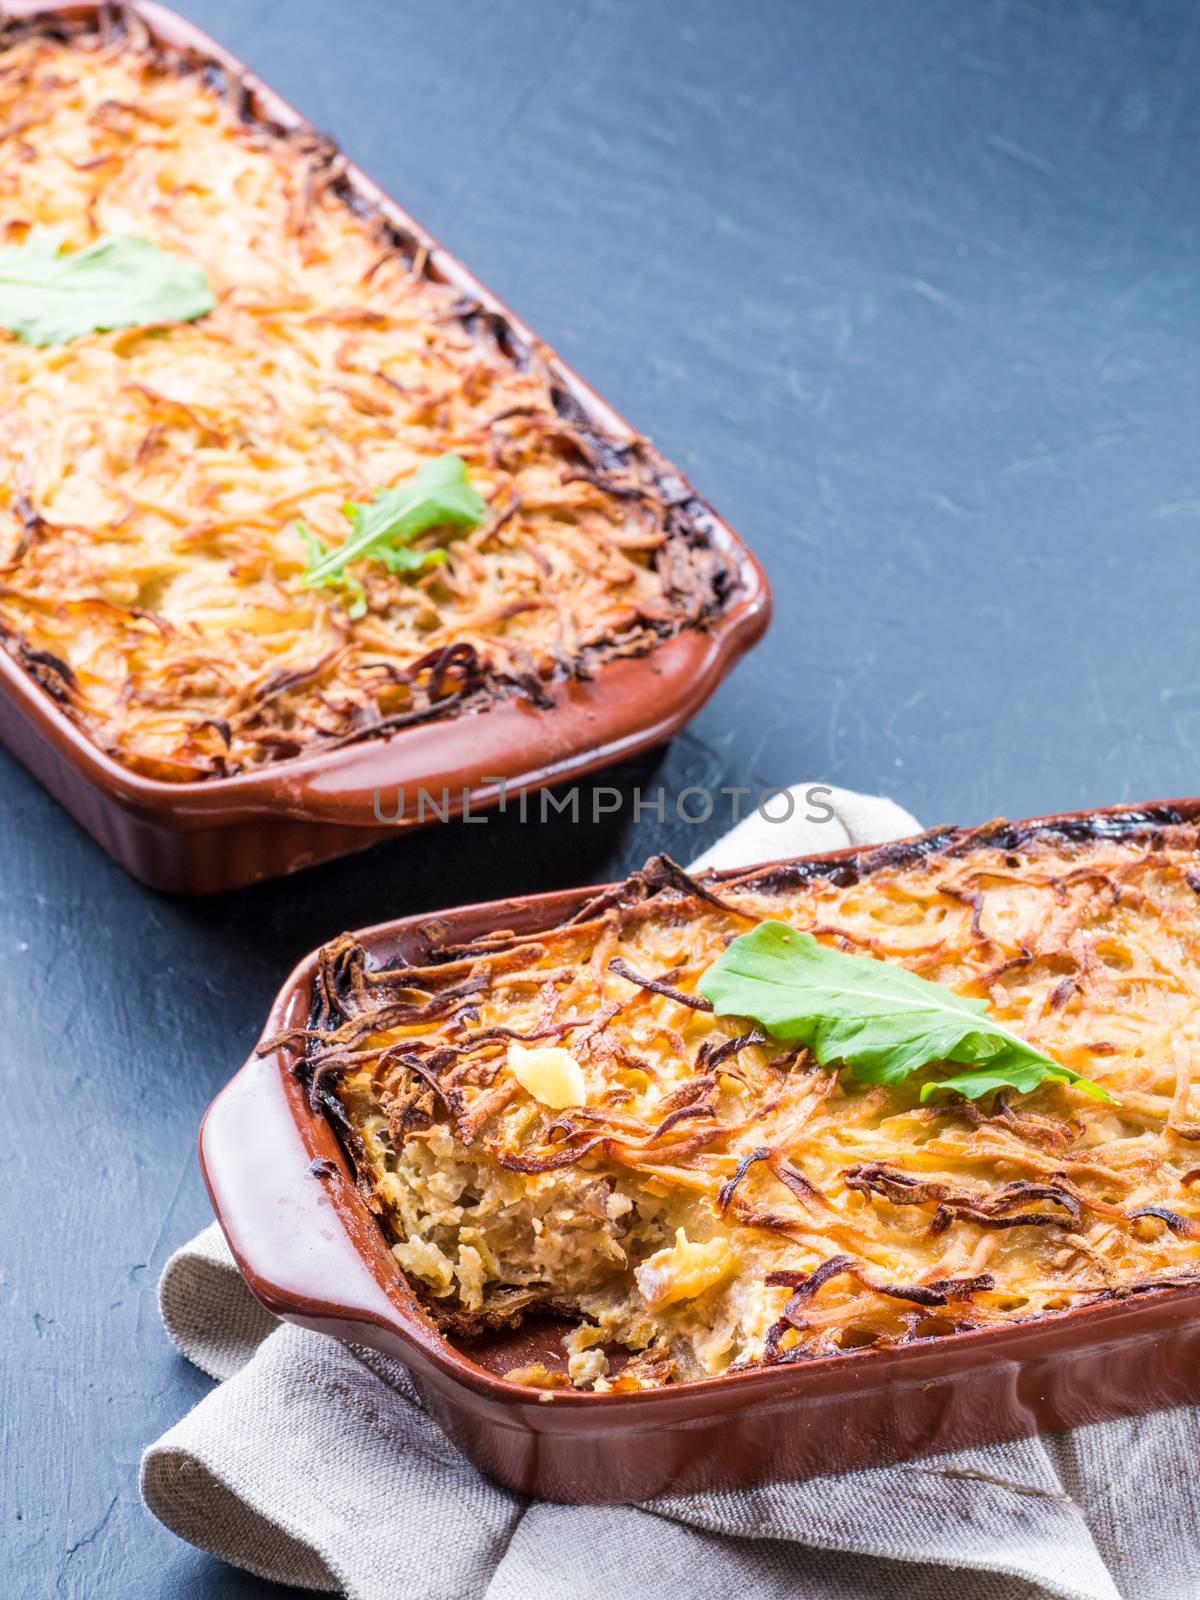 Close up view of appetizing potato casserole with fish, eggs and cream. Potato casserole in serving baking dish on dark concrete background